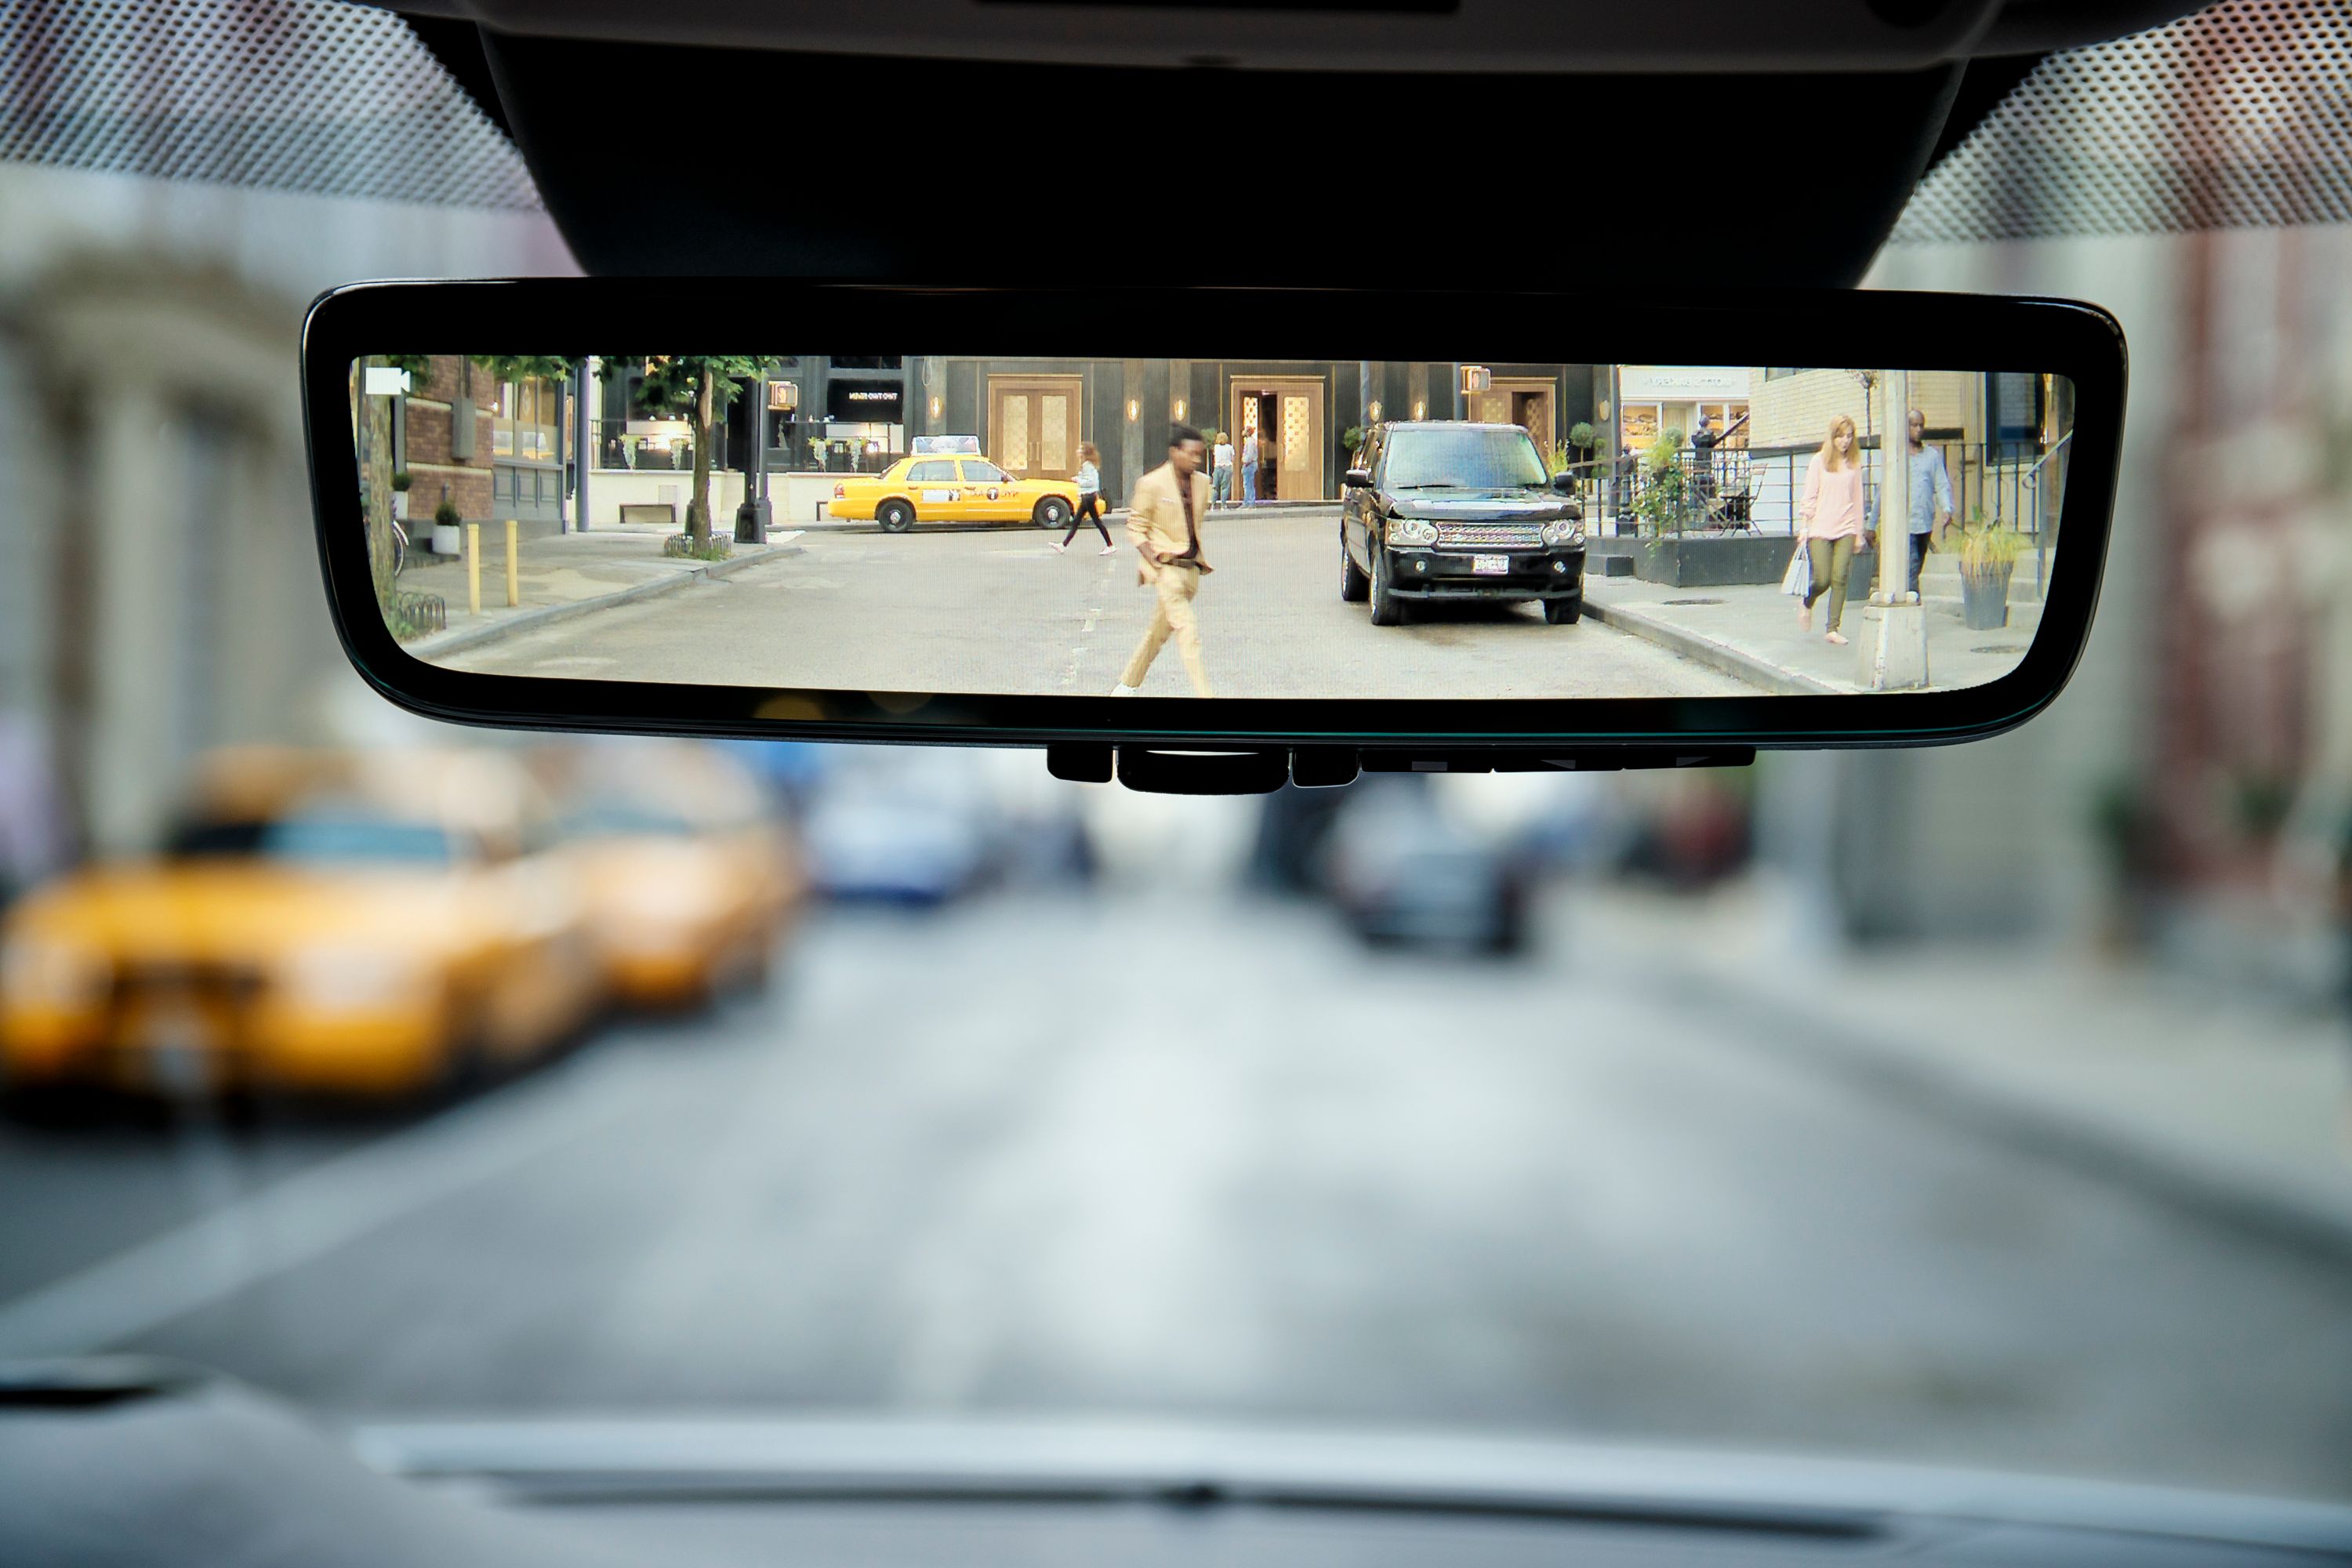 2021 The 2020 Range Rover Evoque Has the Coolest Rear View Mirror Ever